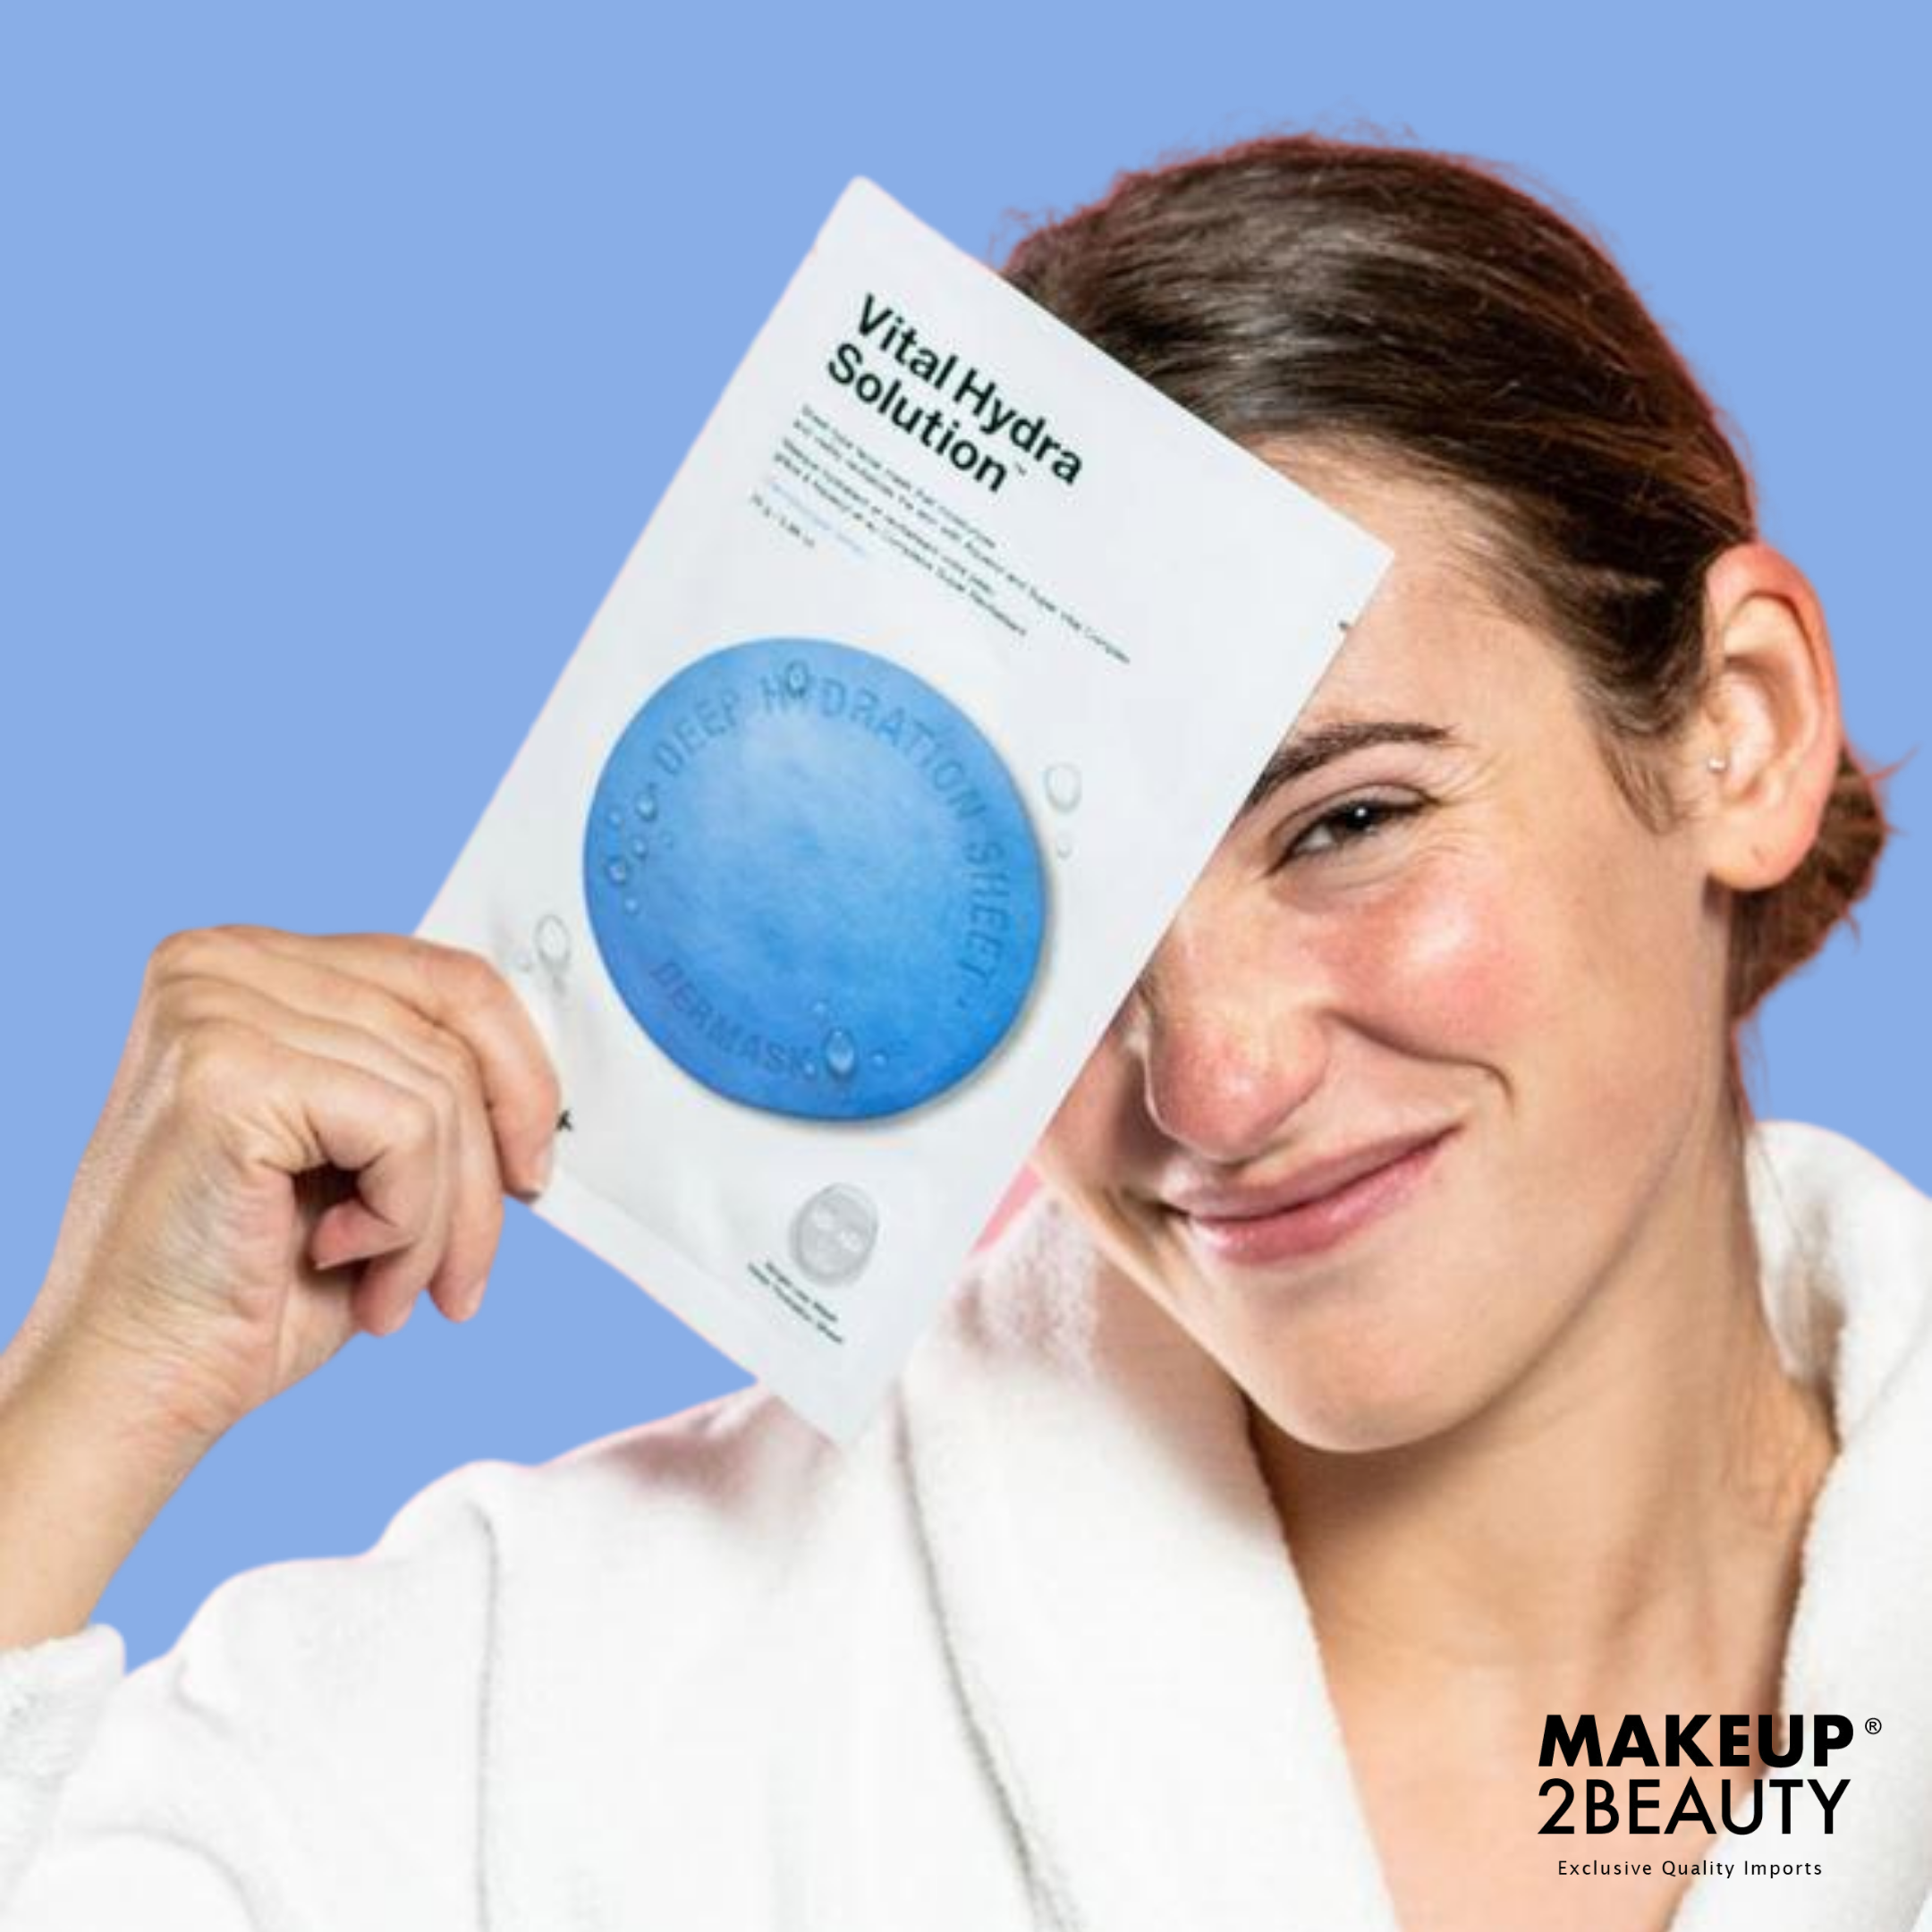 Buy Dr.Jart+ Sheet Mask and Popular Products in Bulk